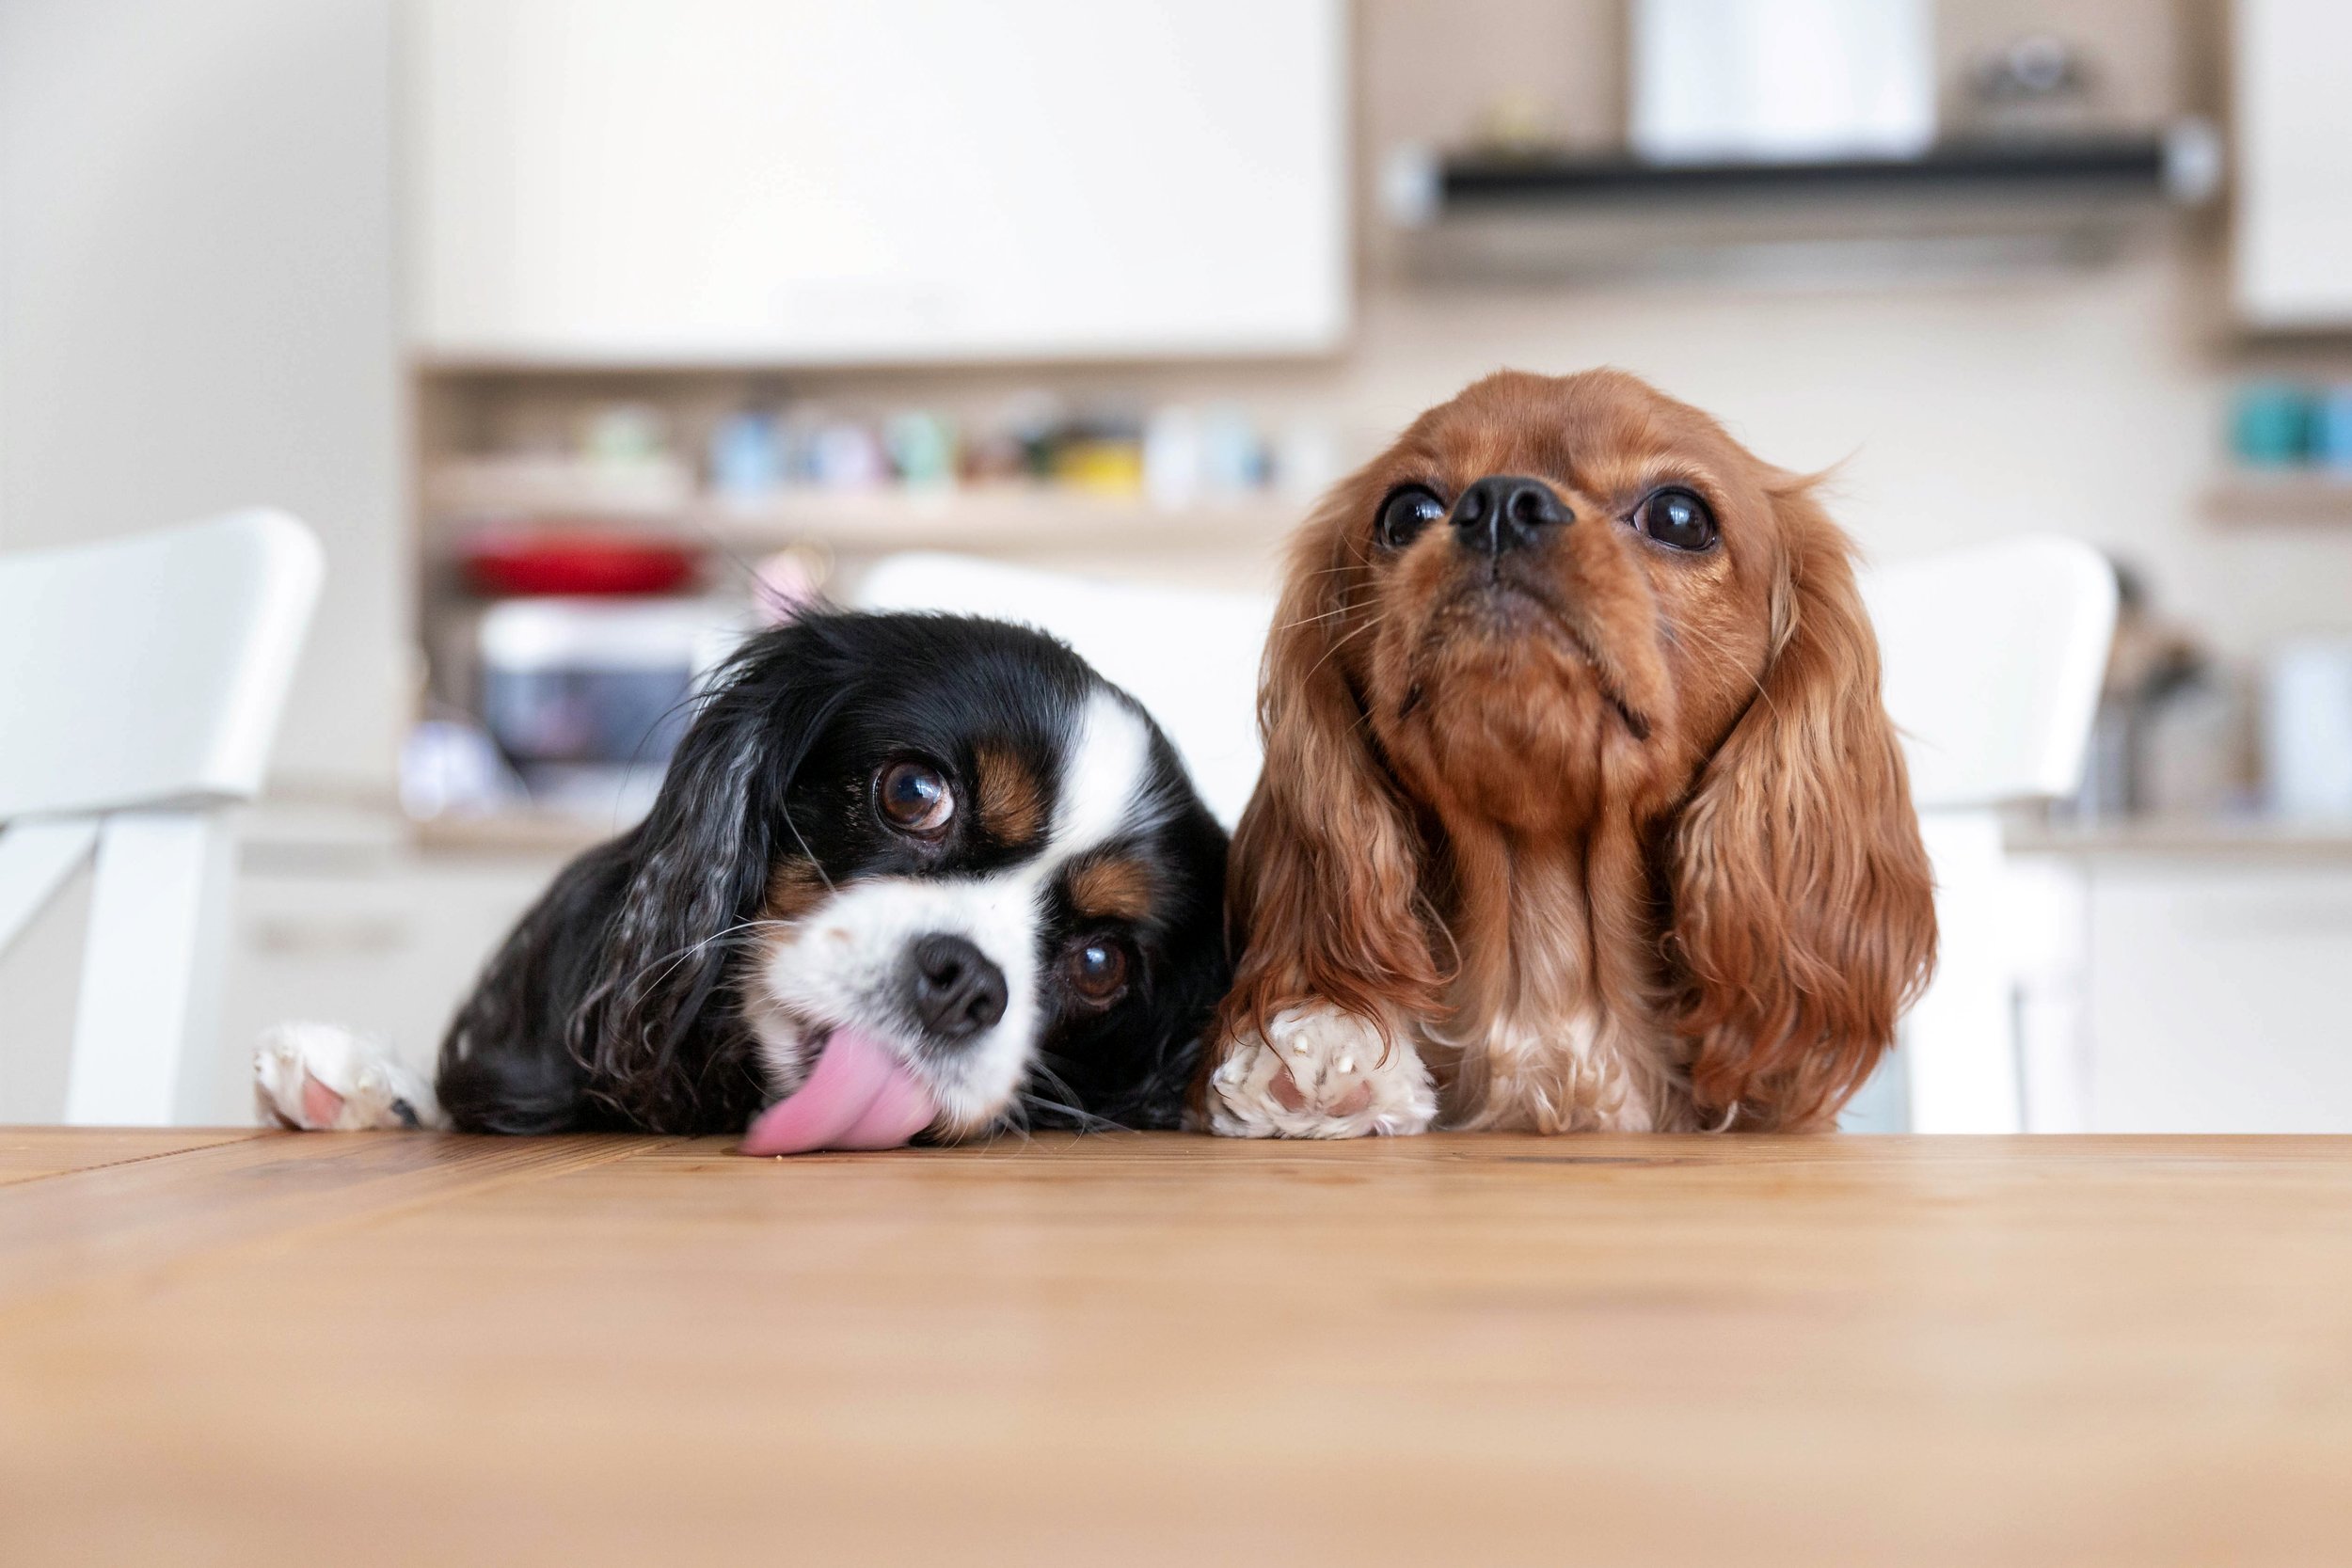 Dogs licking counter_iStock-1126117075.jpeg